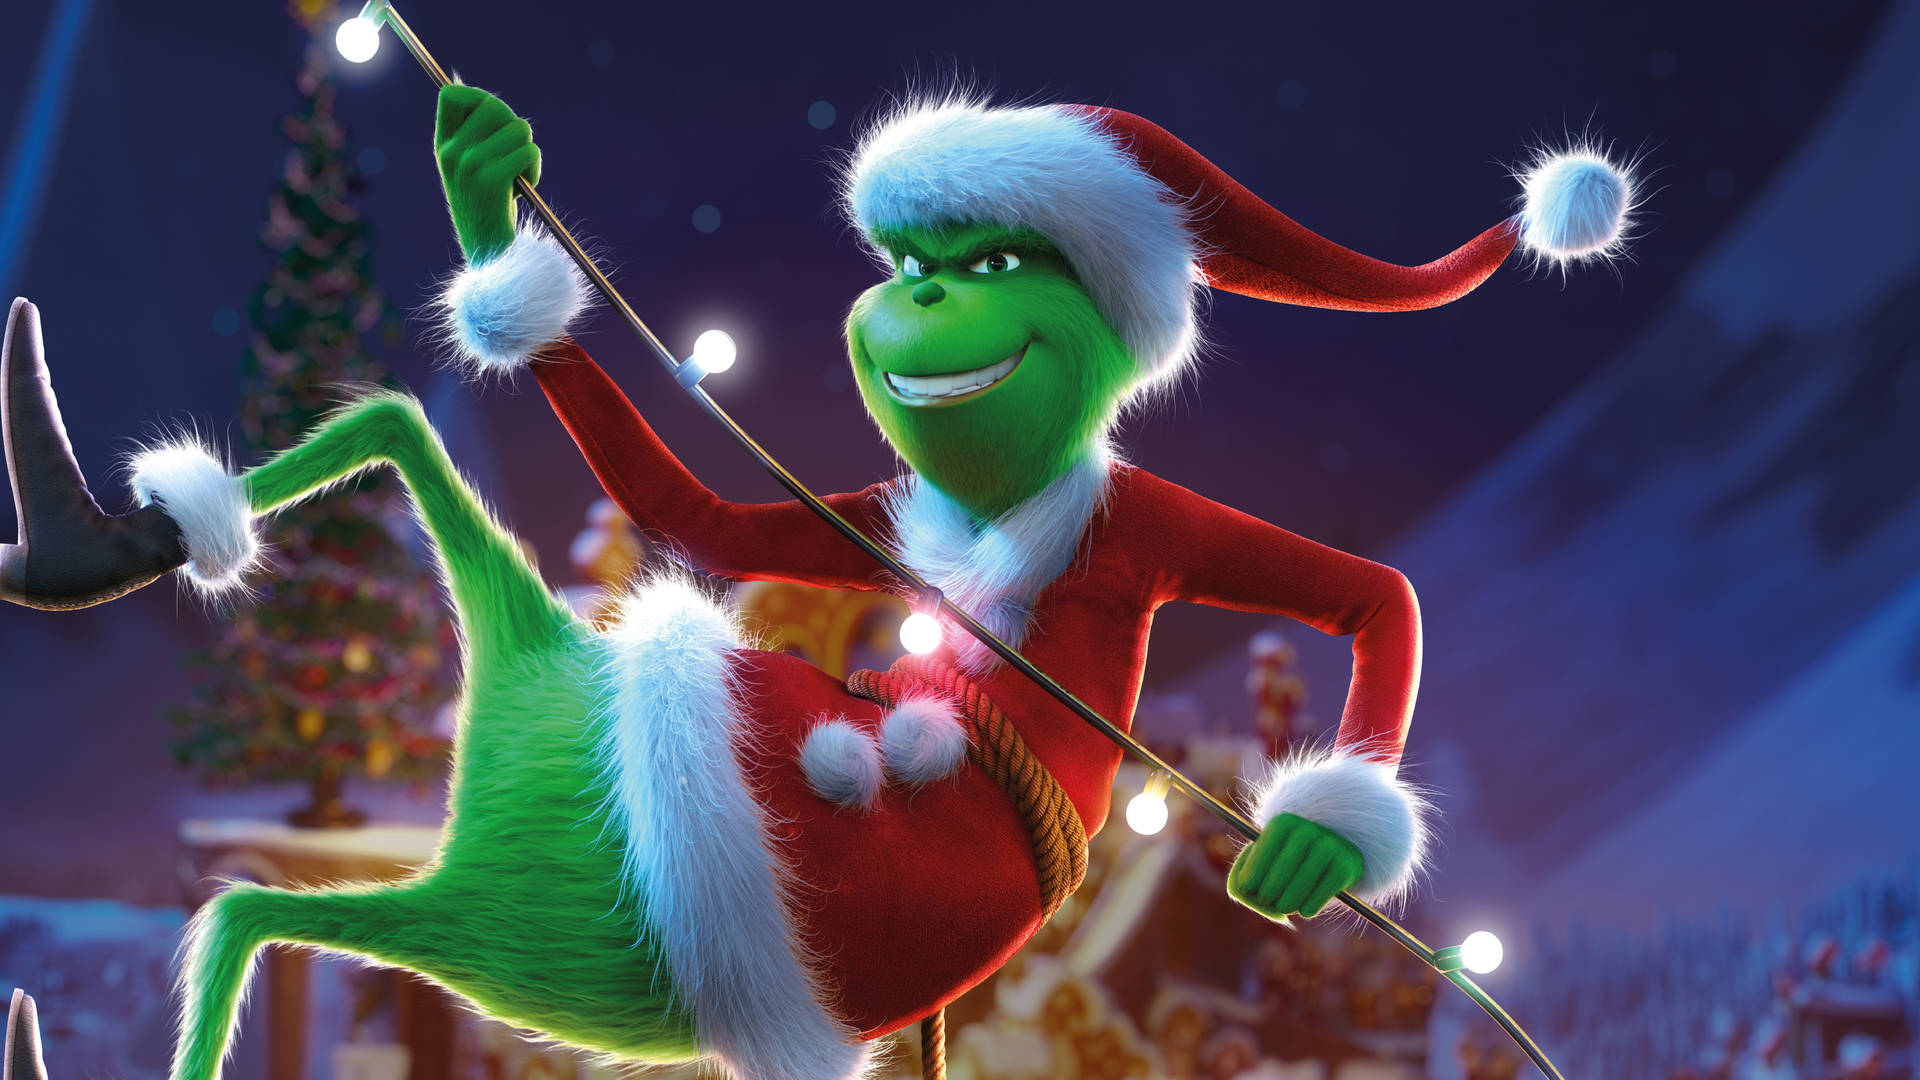 The Grinch Climbing Background